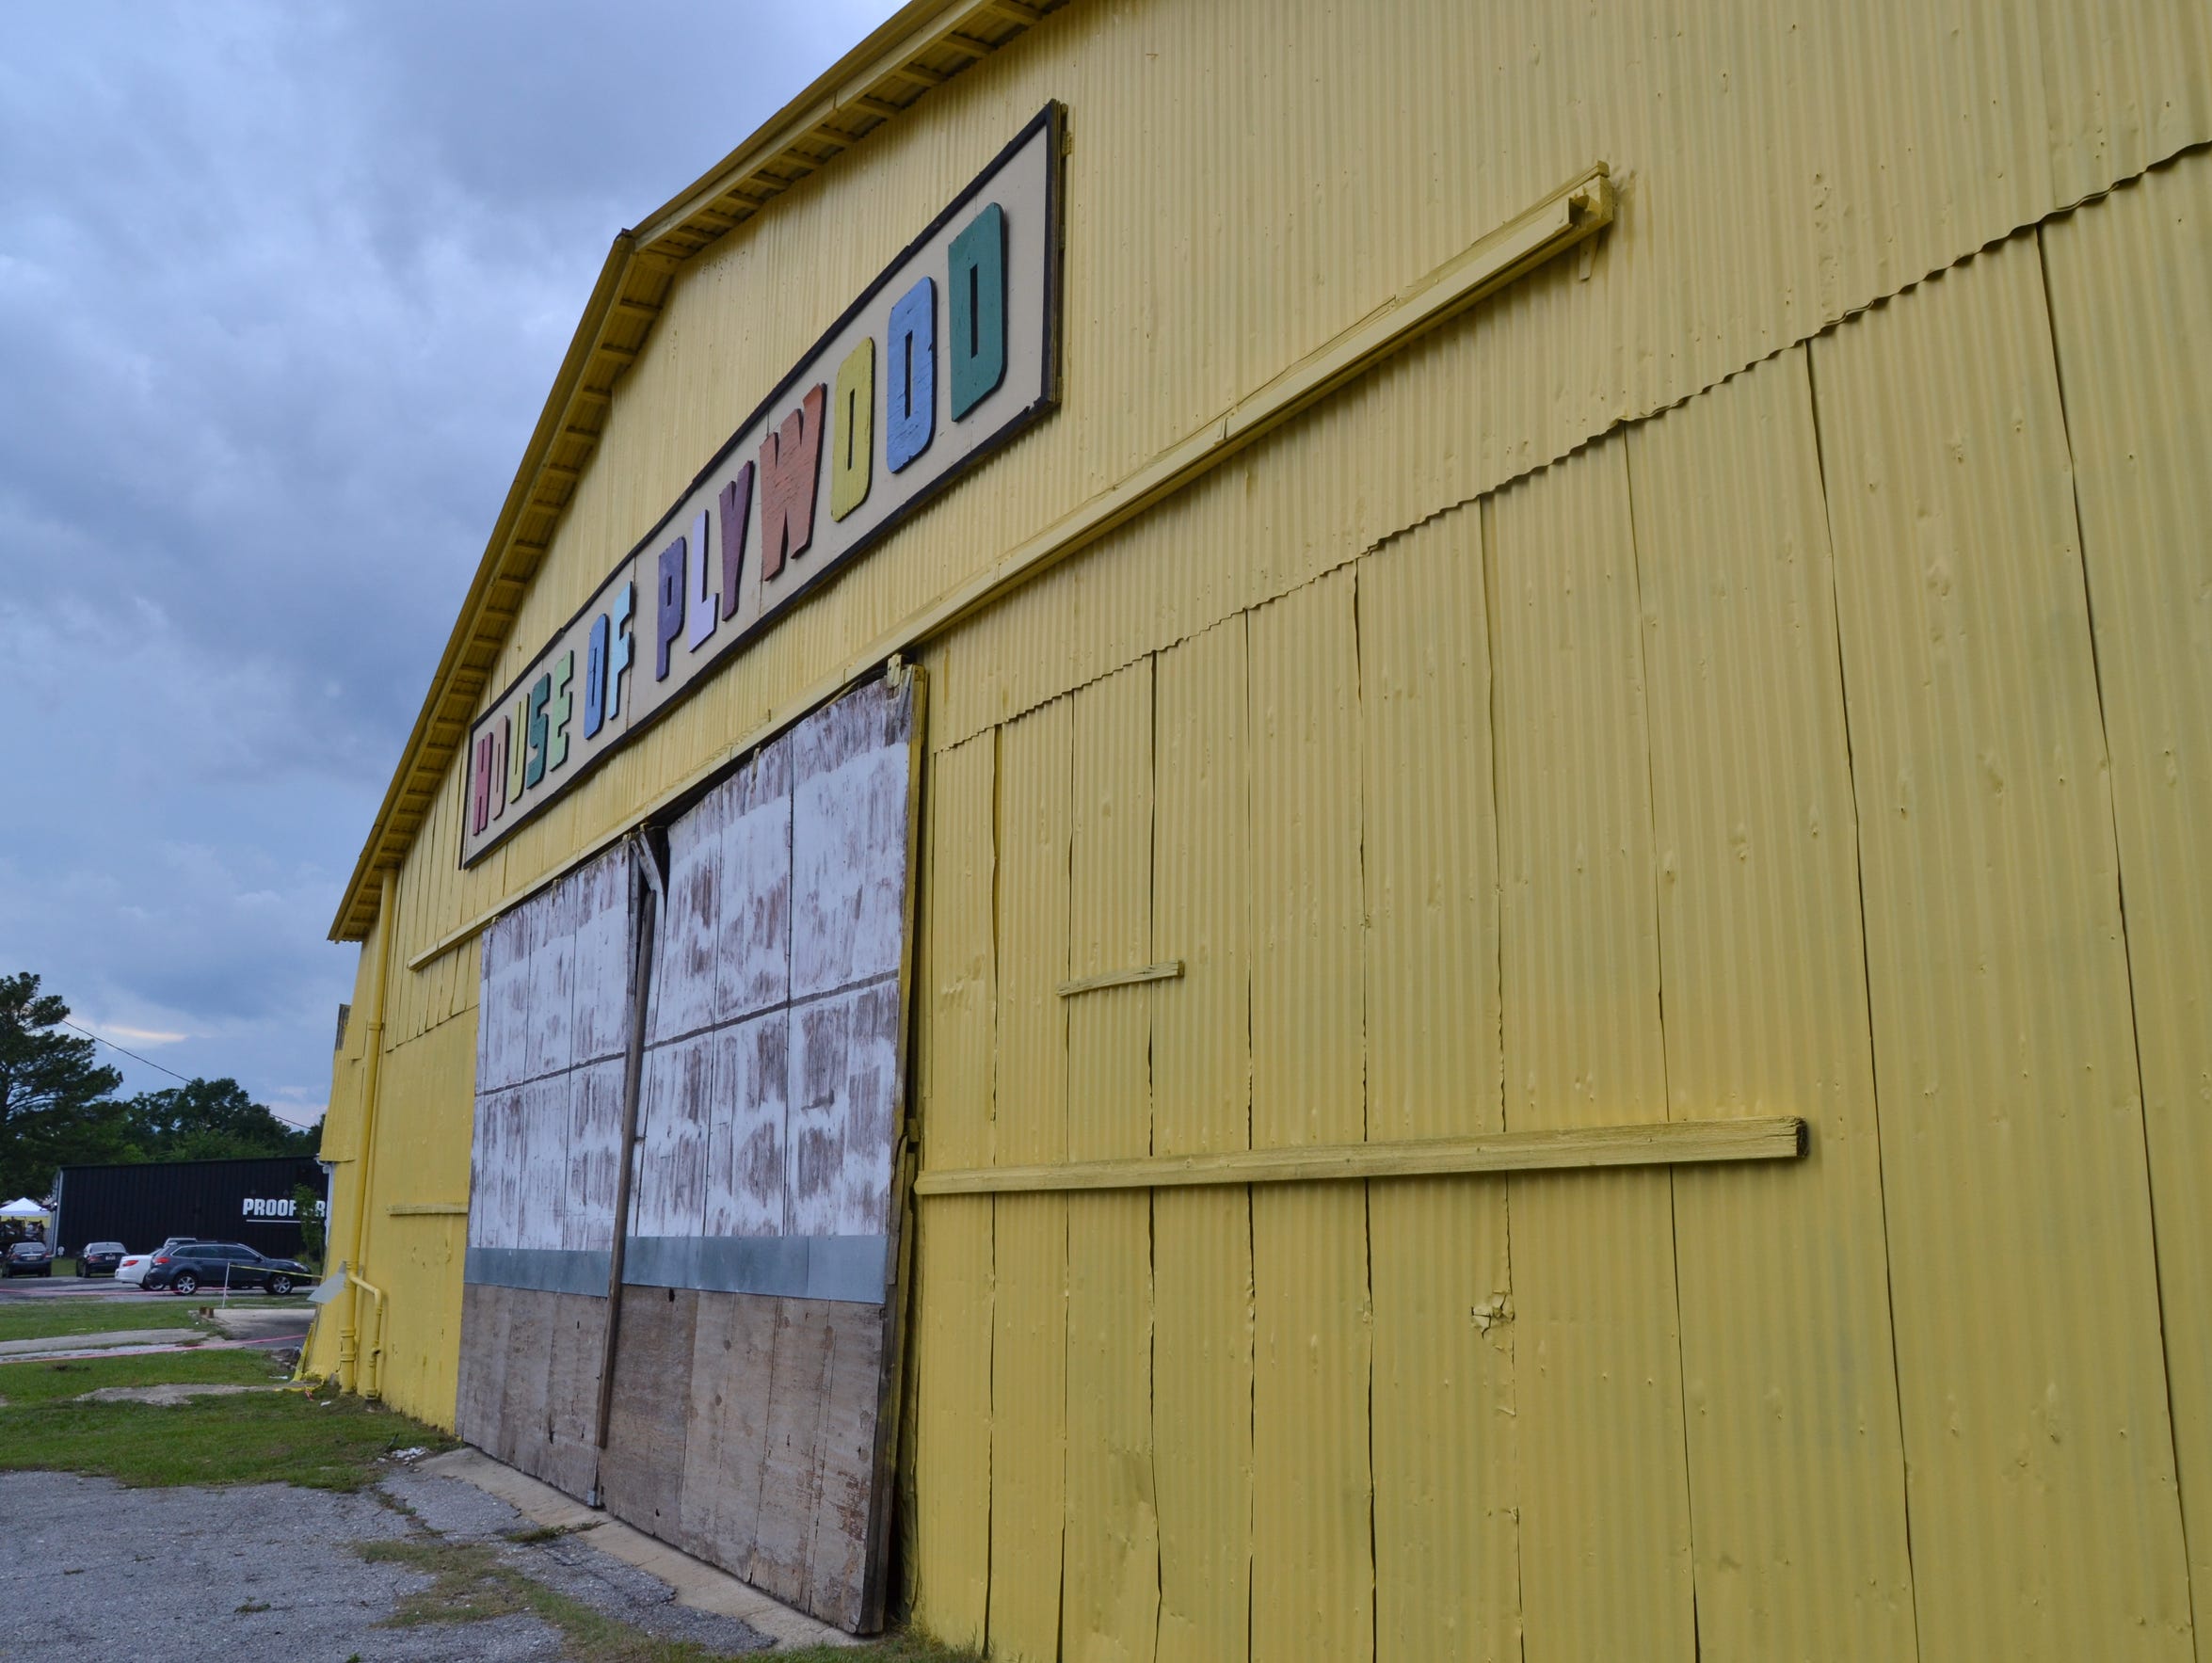 Fresh yellow paint adorns a warehouse in Railroad Square.